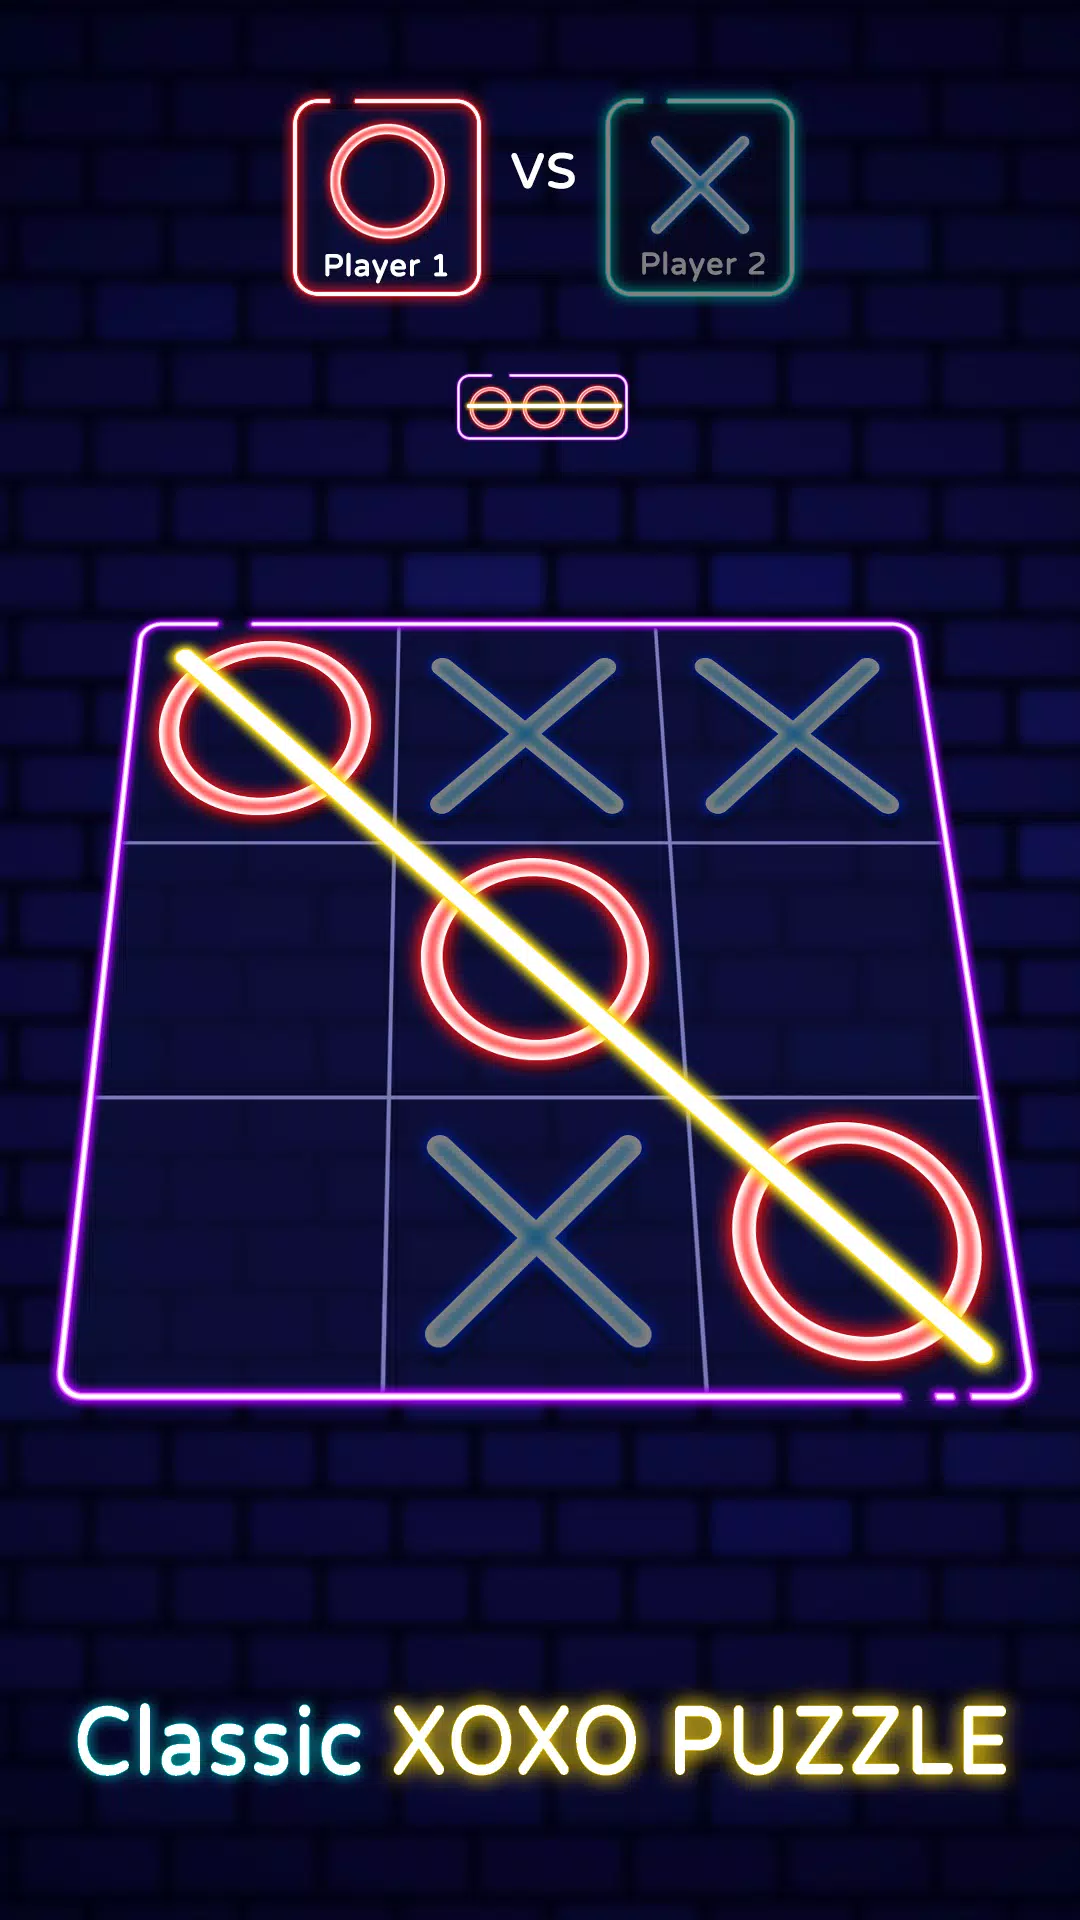 Tic Tac Toe Multiplayer Fans